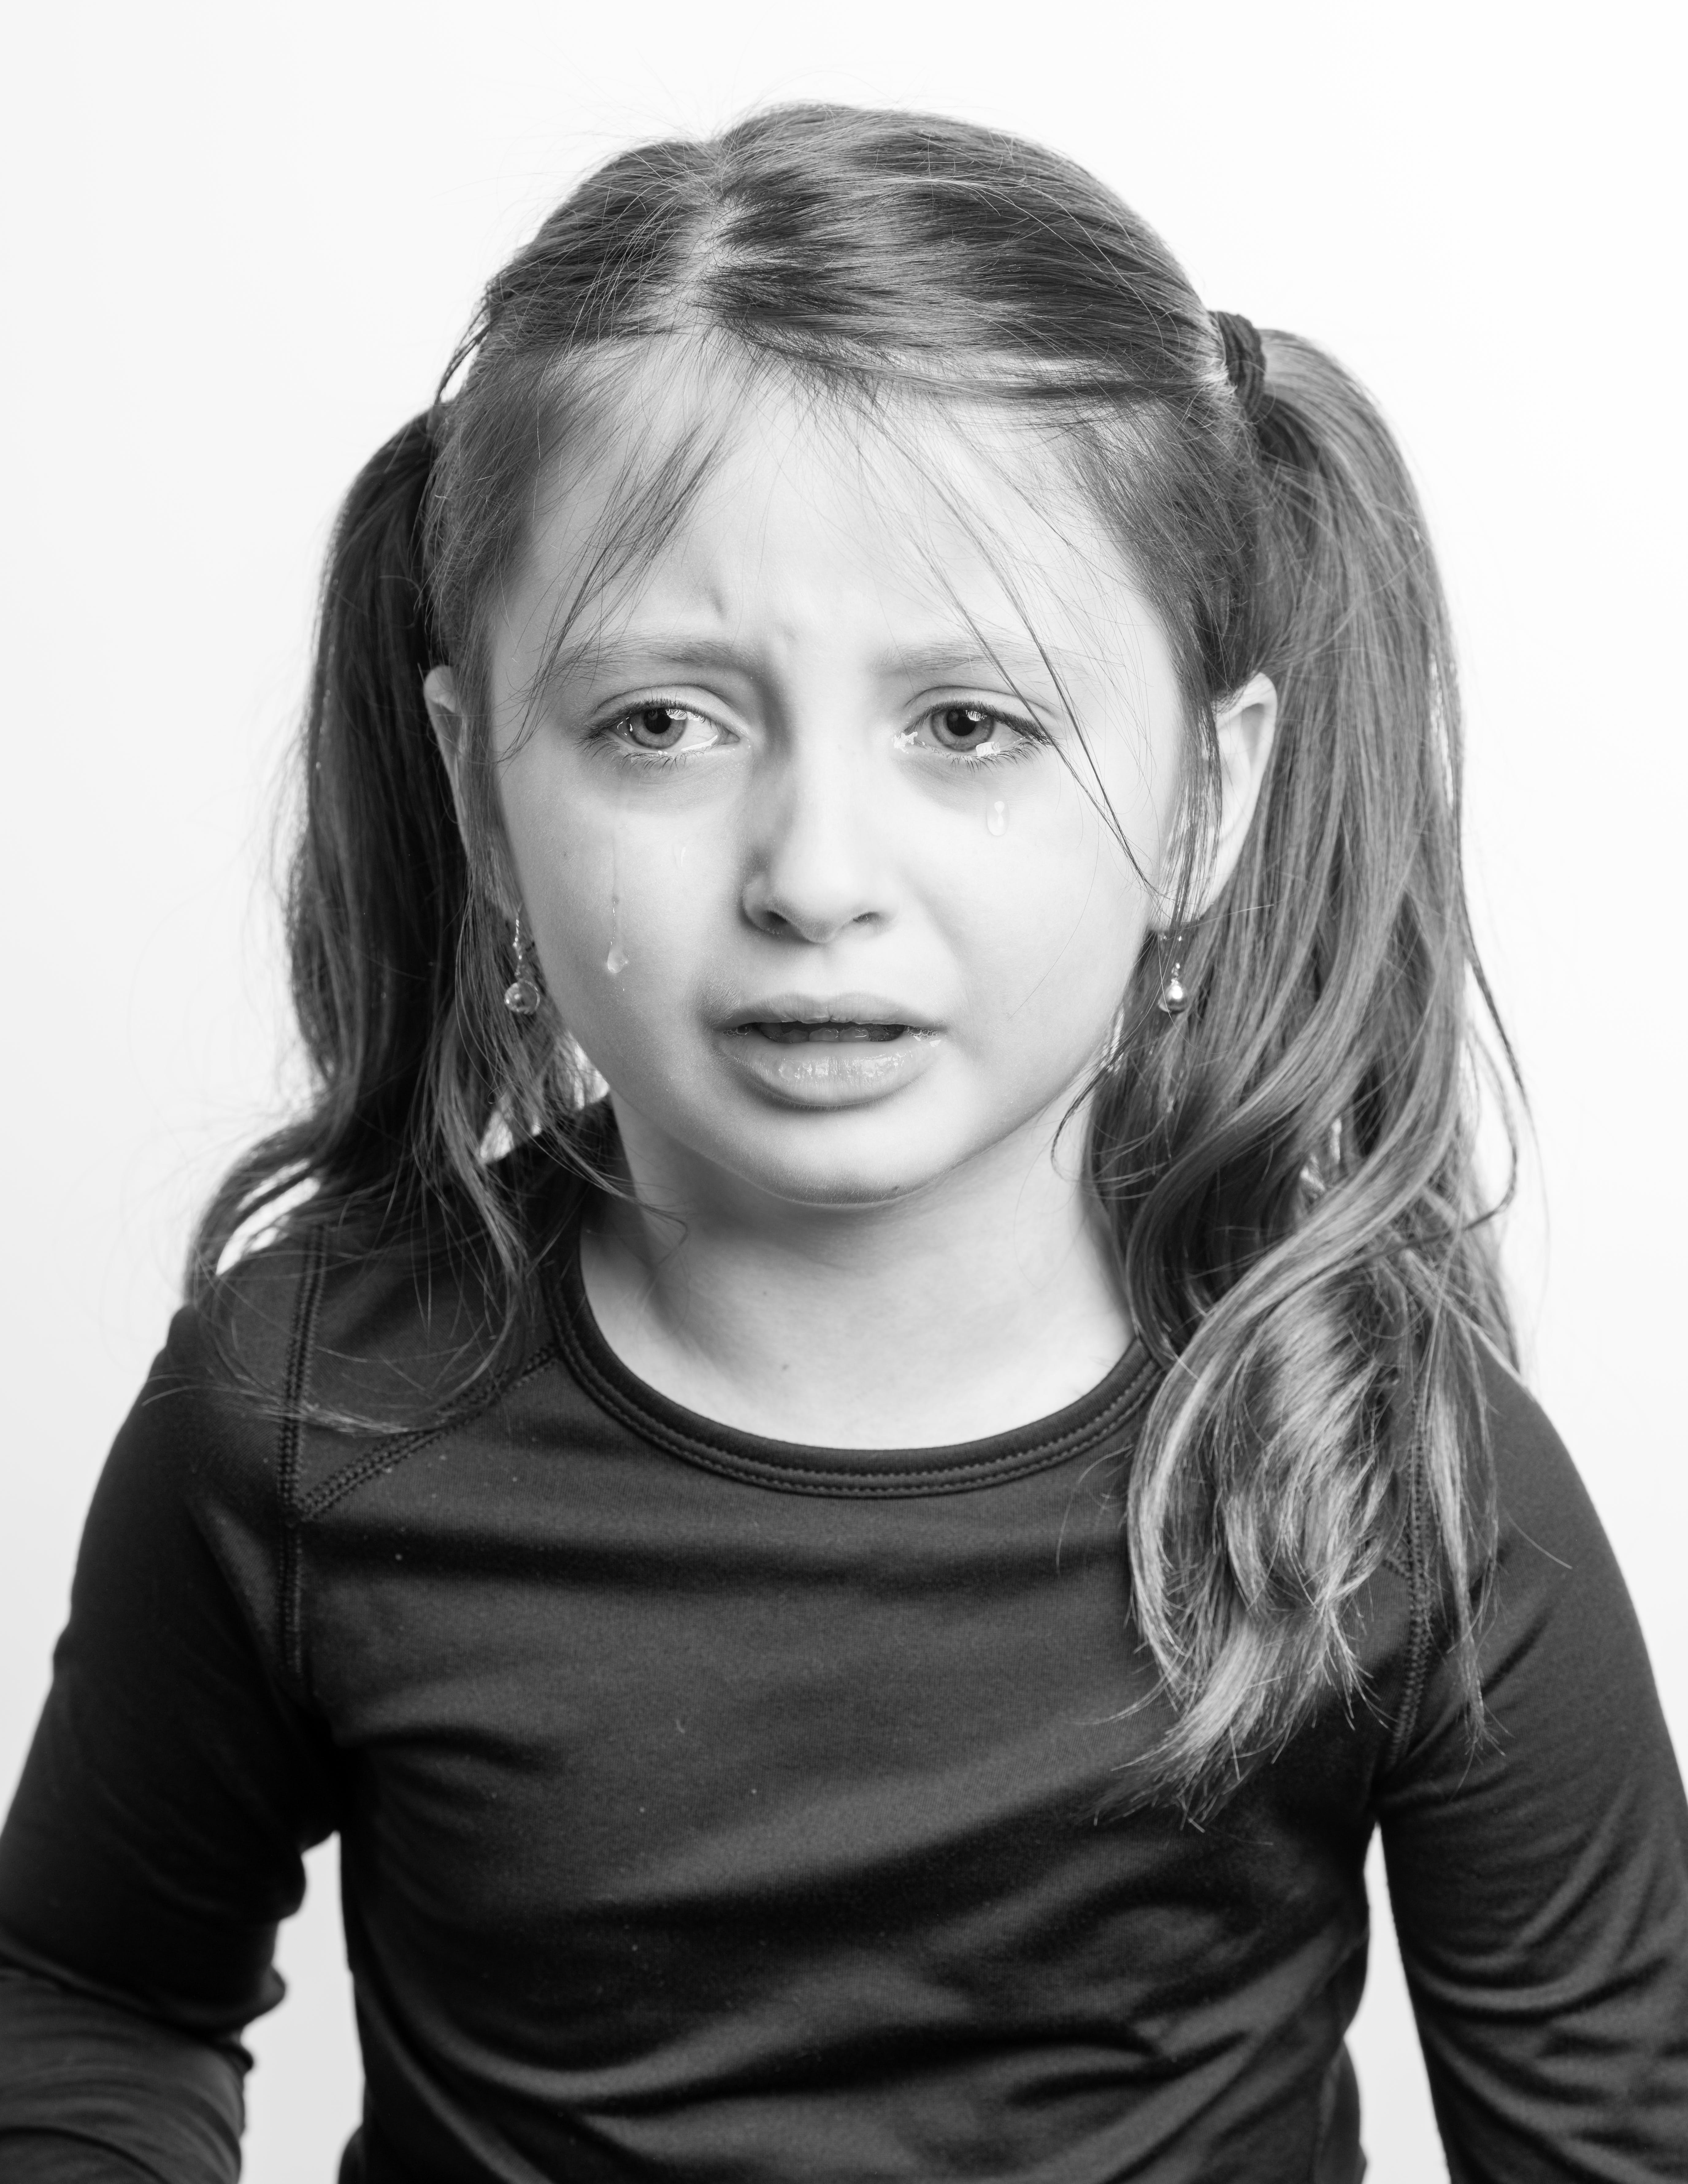 A black-and-white image of a little girl crying | Source: Pexels